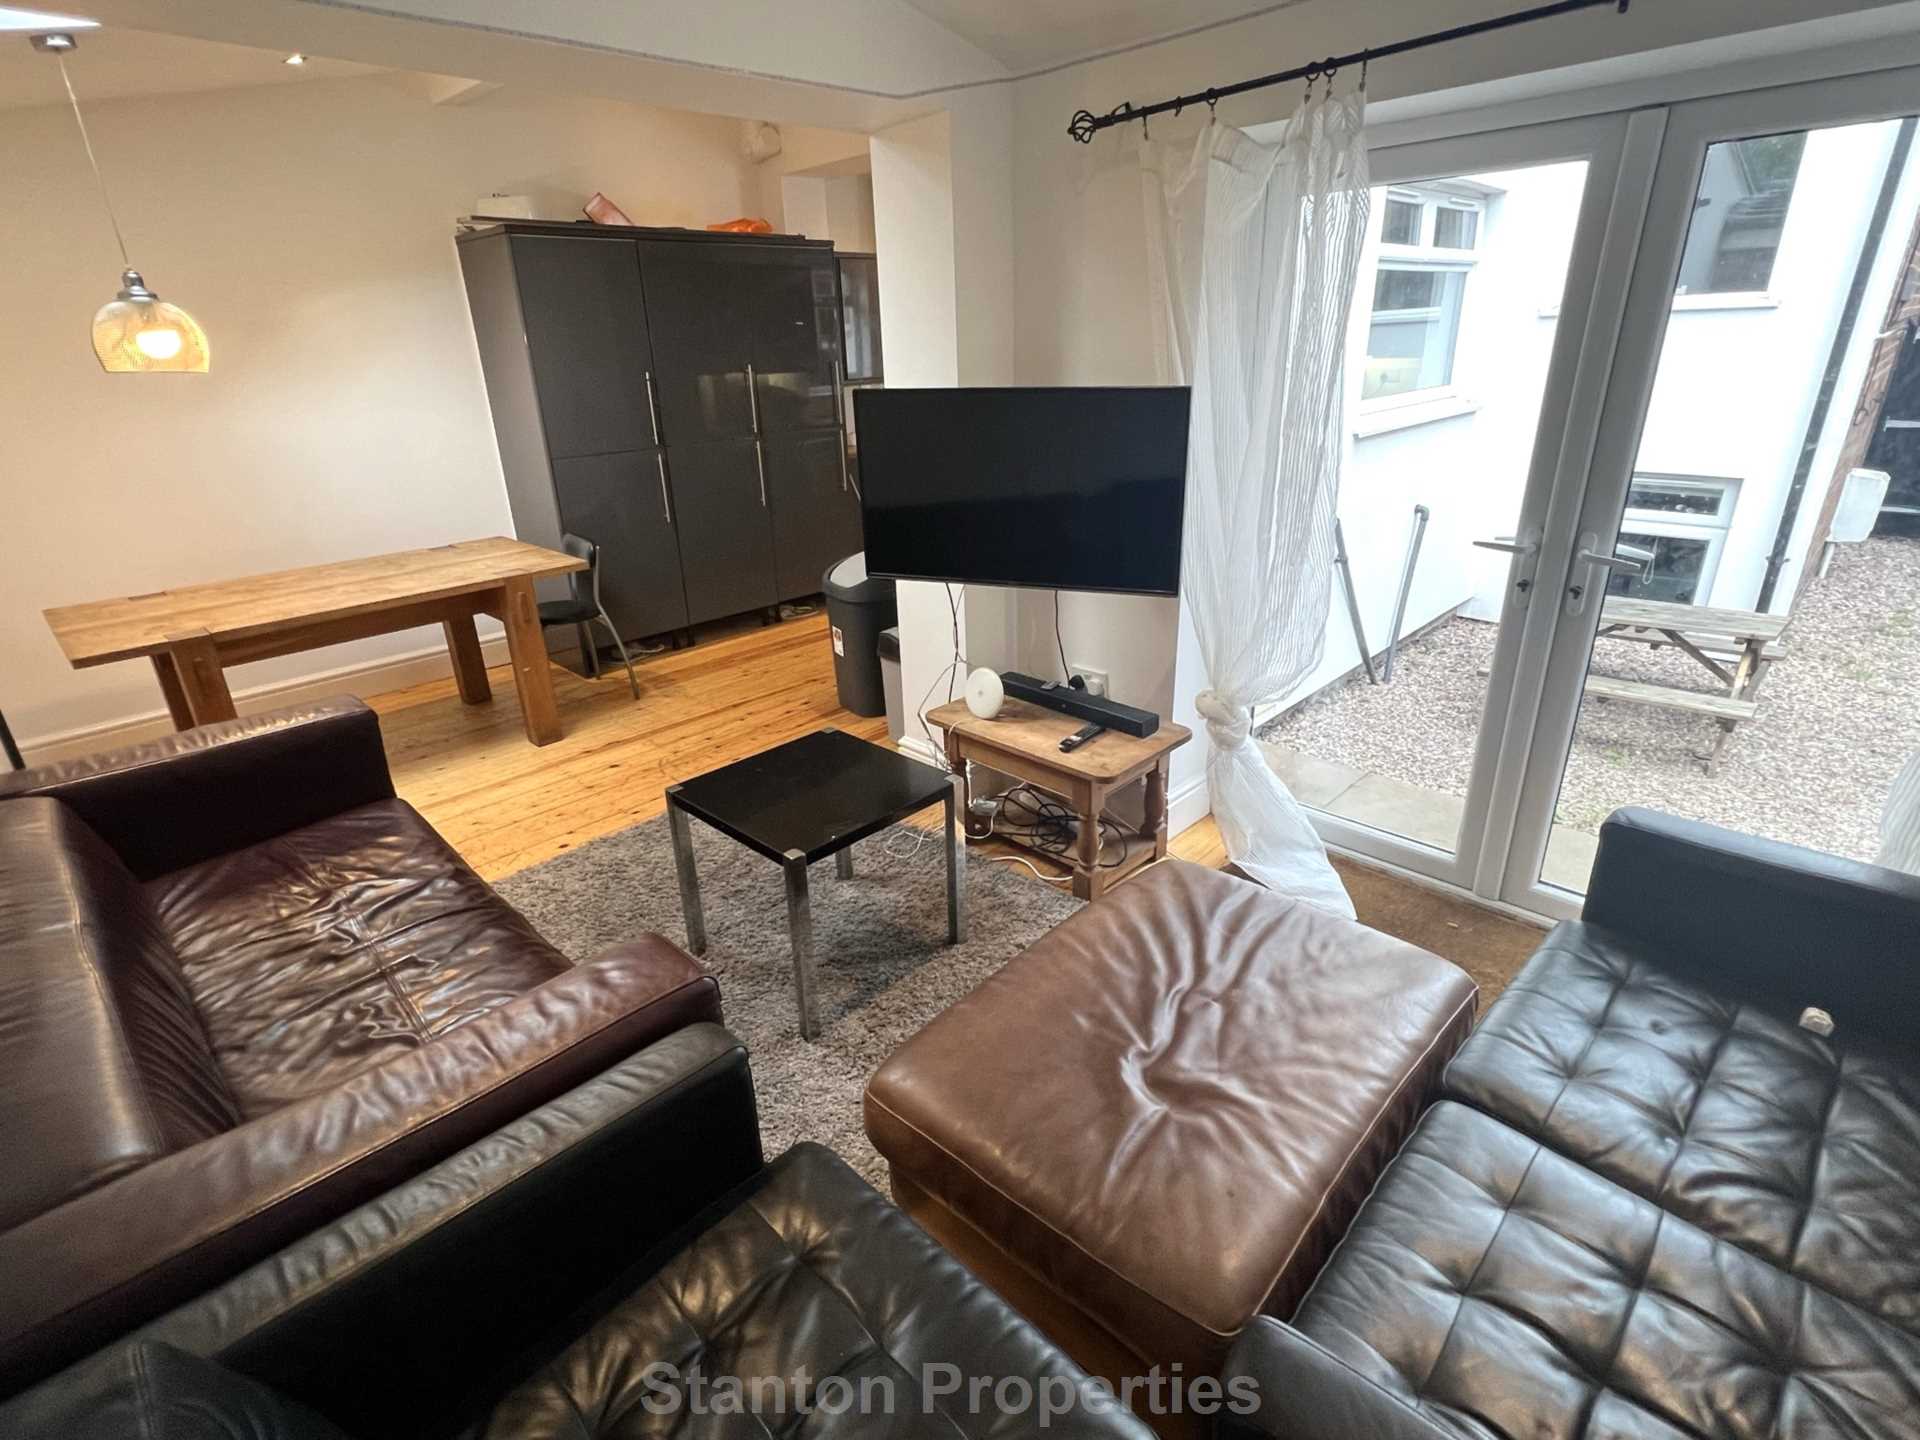 £150 PER WEEK / £650 PER MONTH, Lombard Grove, Manchester, Image 4